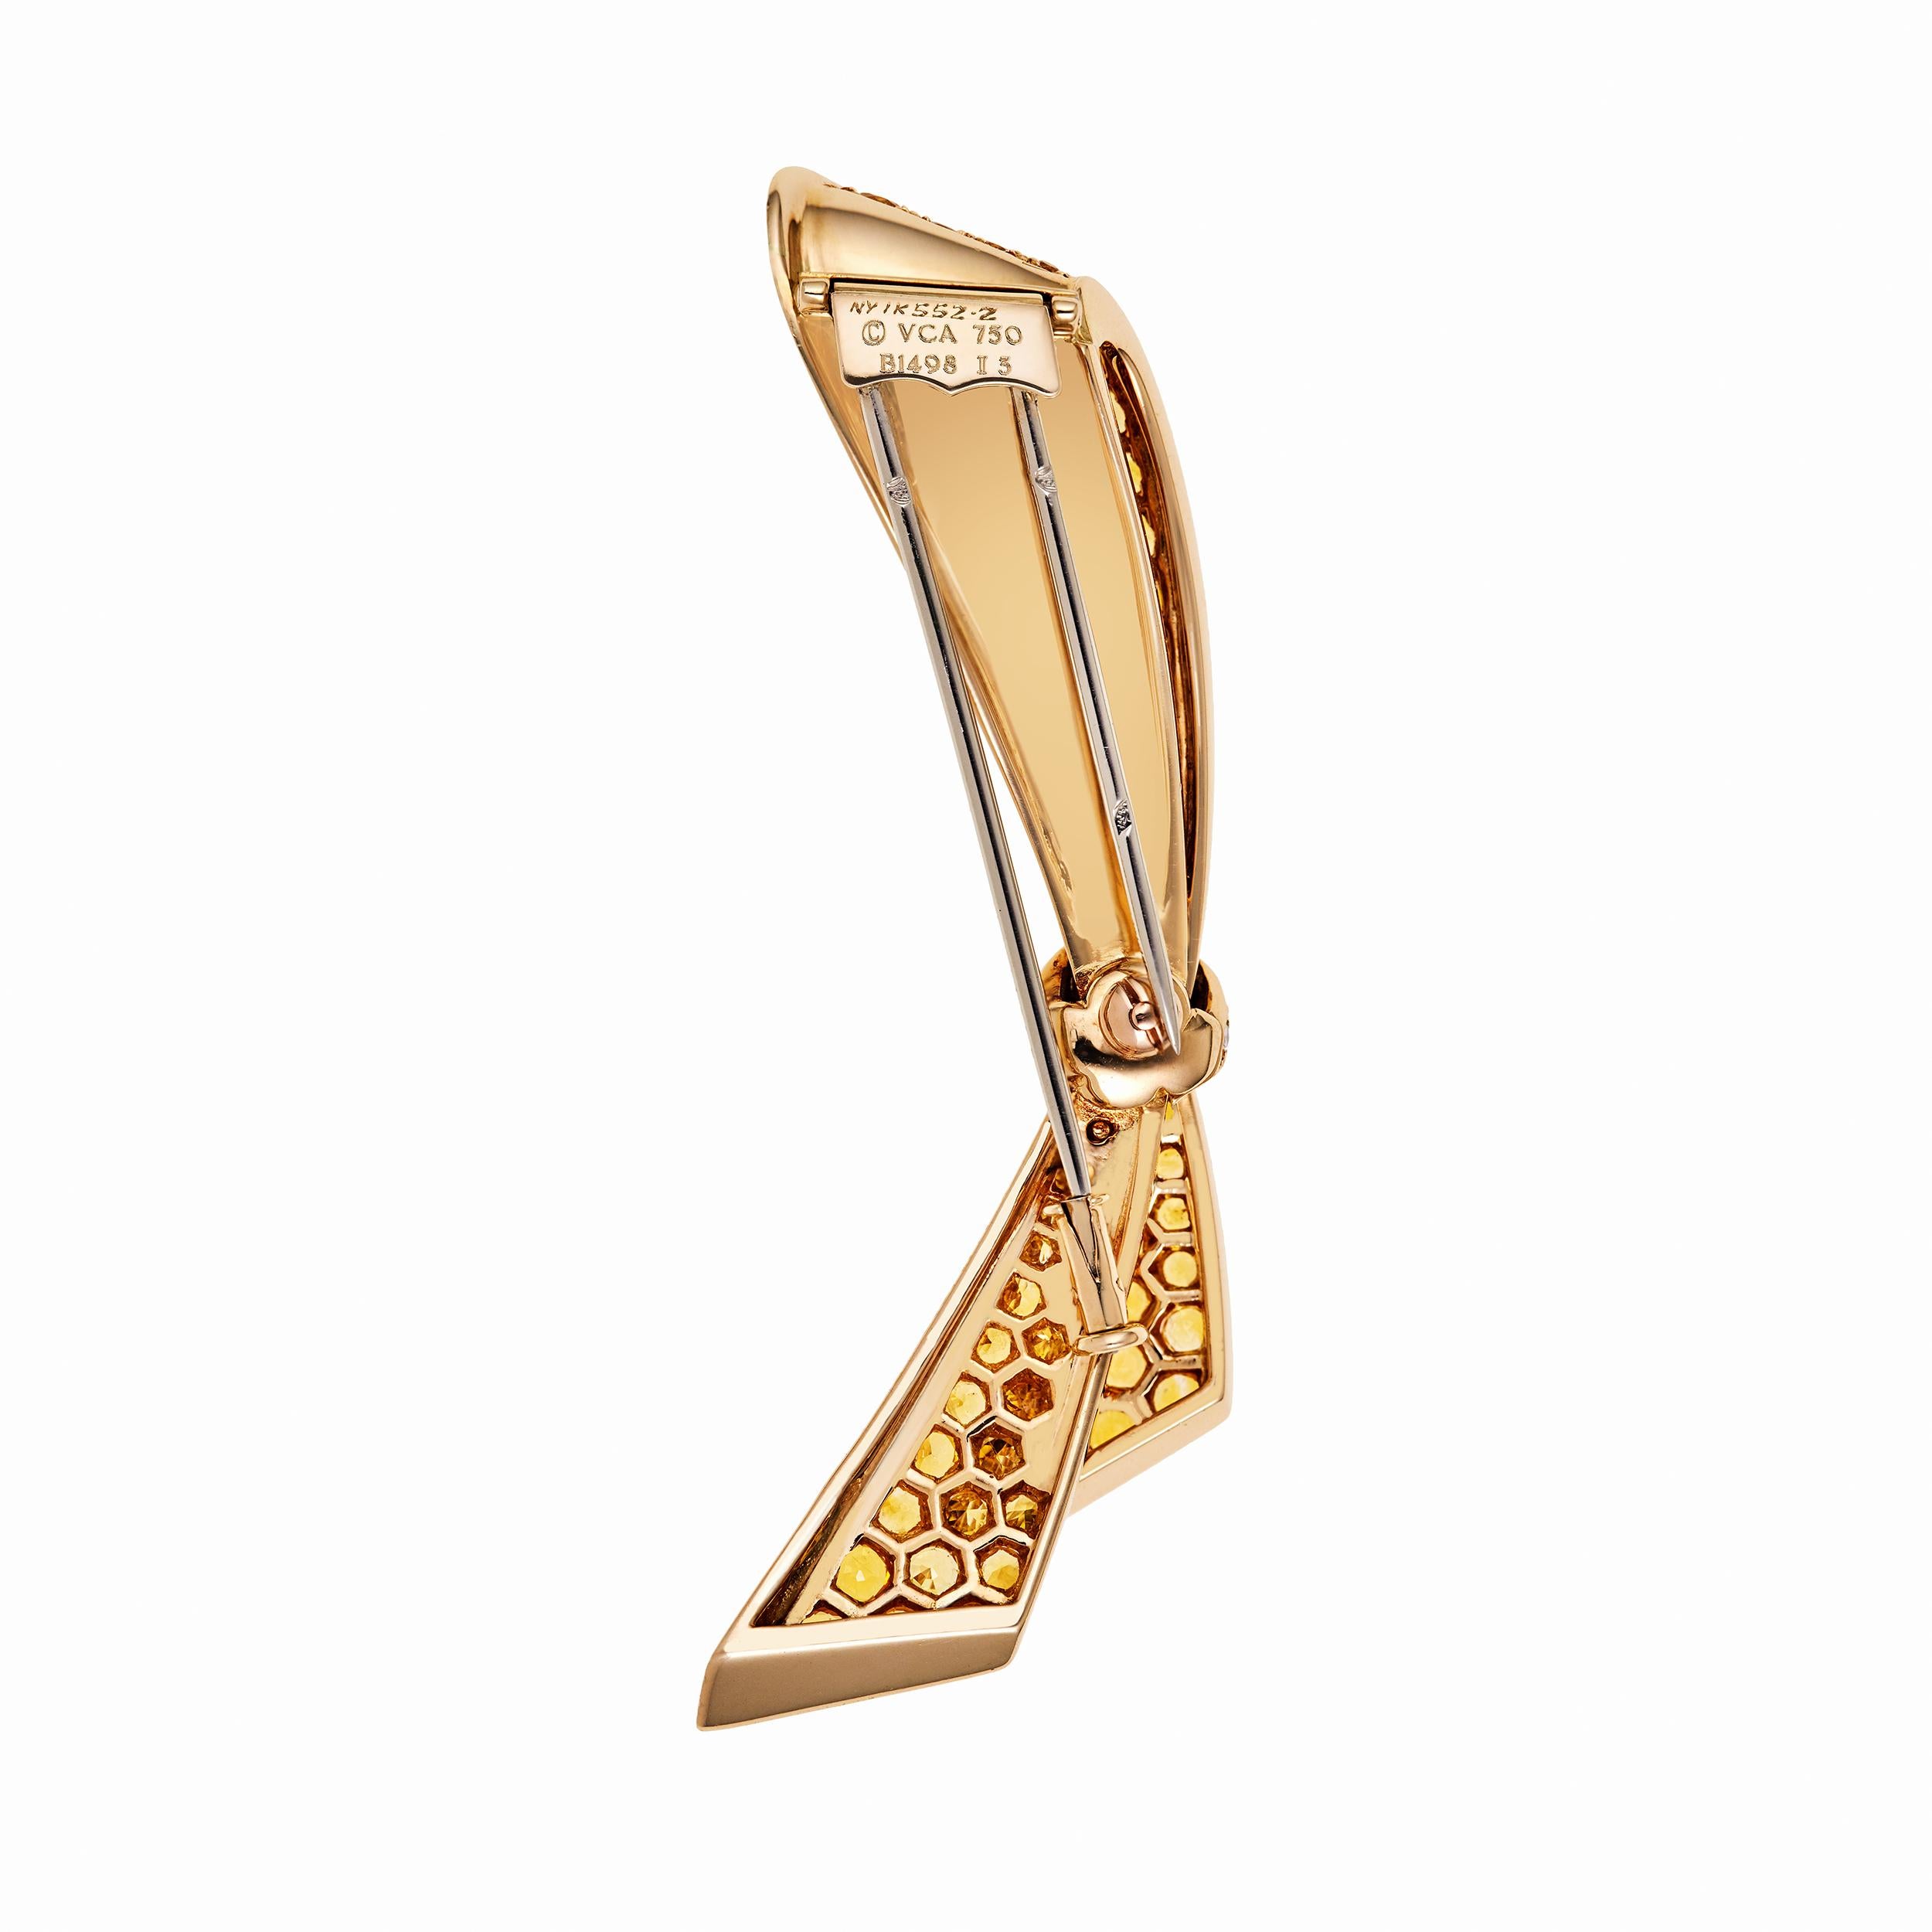 Van Cleef & Arpels Clip in 18 Karat Yellow Gold and Platinum.  Signed Piece.  Holds 3.69 Carats of Yellow Sapphires and 0.20 Carats of Diamonds in the Platinum band that pinches the Yellow Ribbon together.  Perfect condition.  Clip measures 2 1/2